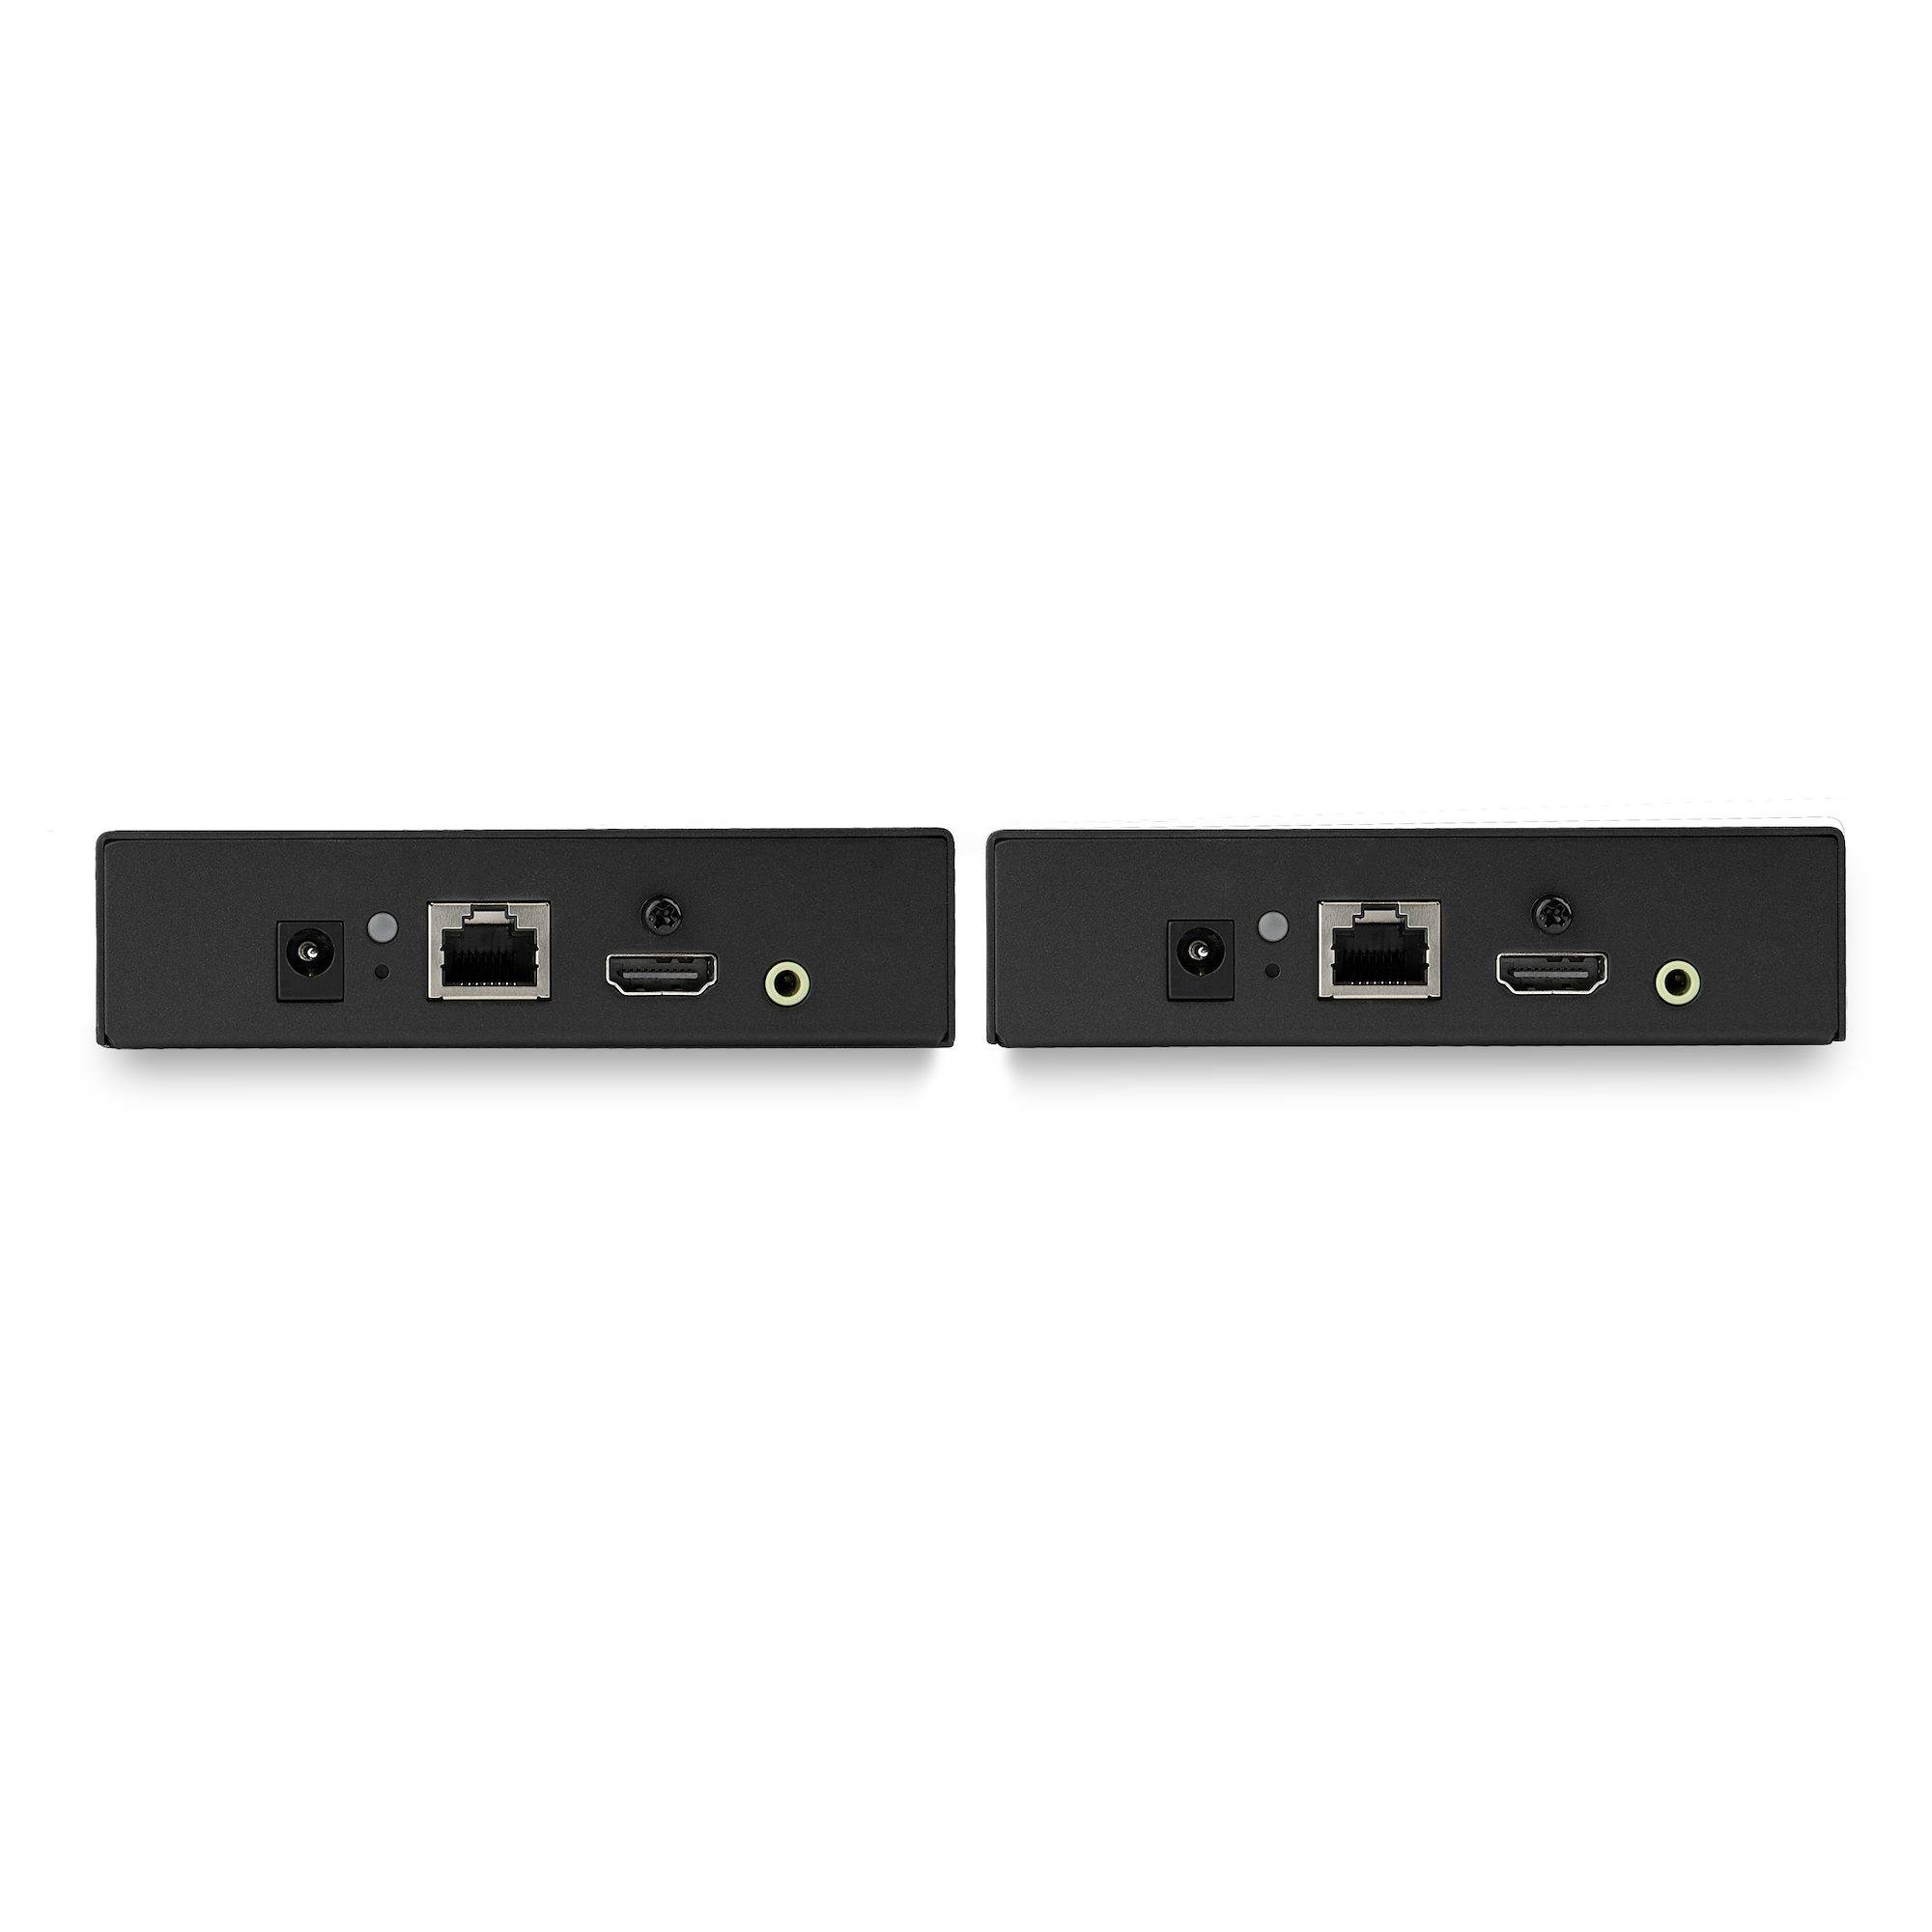 Rca Informatique - image du produit : HDMI OVER IP EXTENDER KIT WITH VIDEO WALL SUPPORT - 1080P